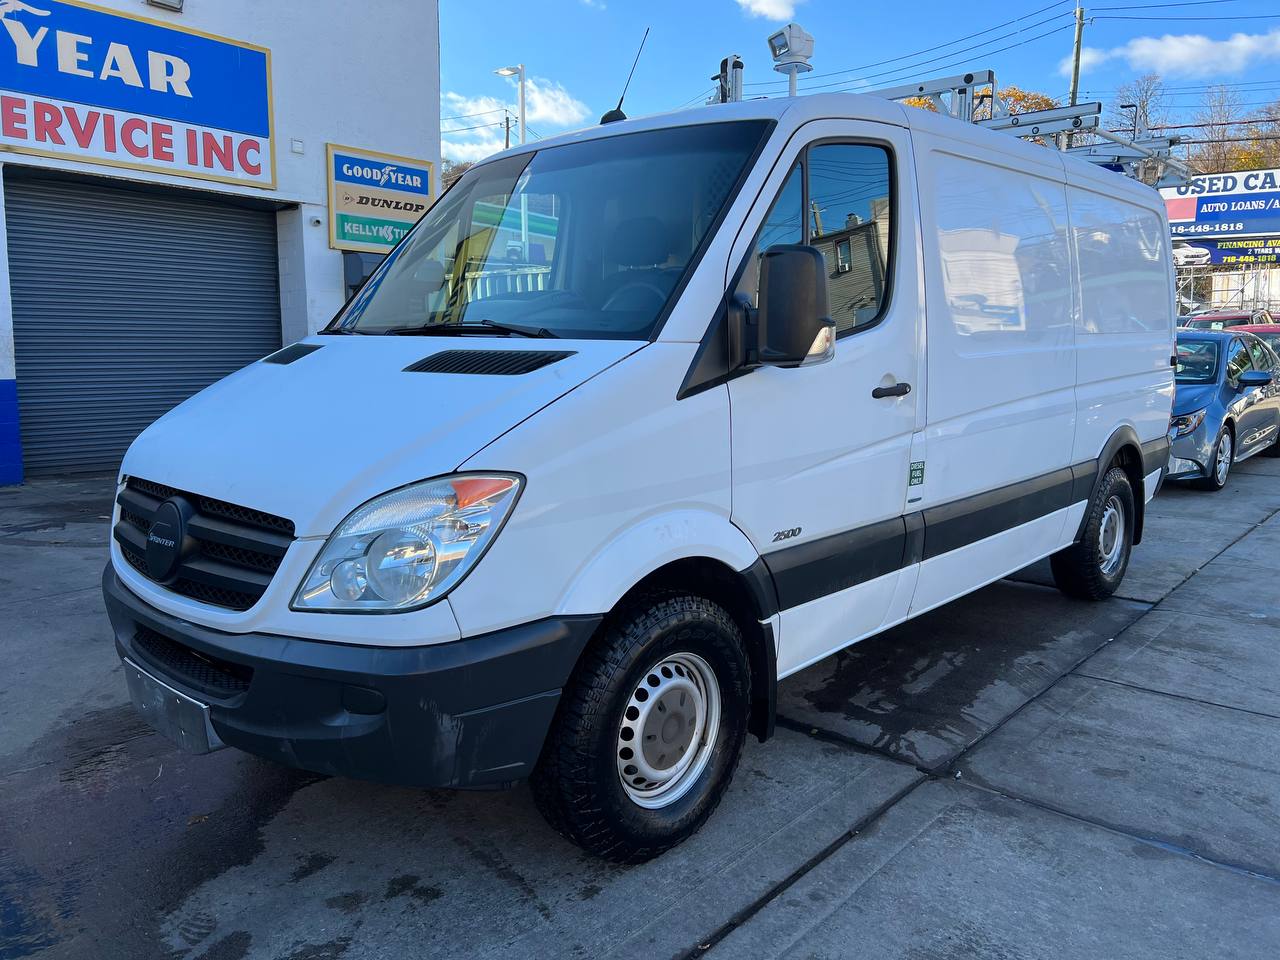 Used Car - 2012 Mercedes-Benz Sprinter Cargo 2500 for Sale in Staten Island, NY